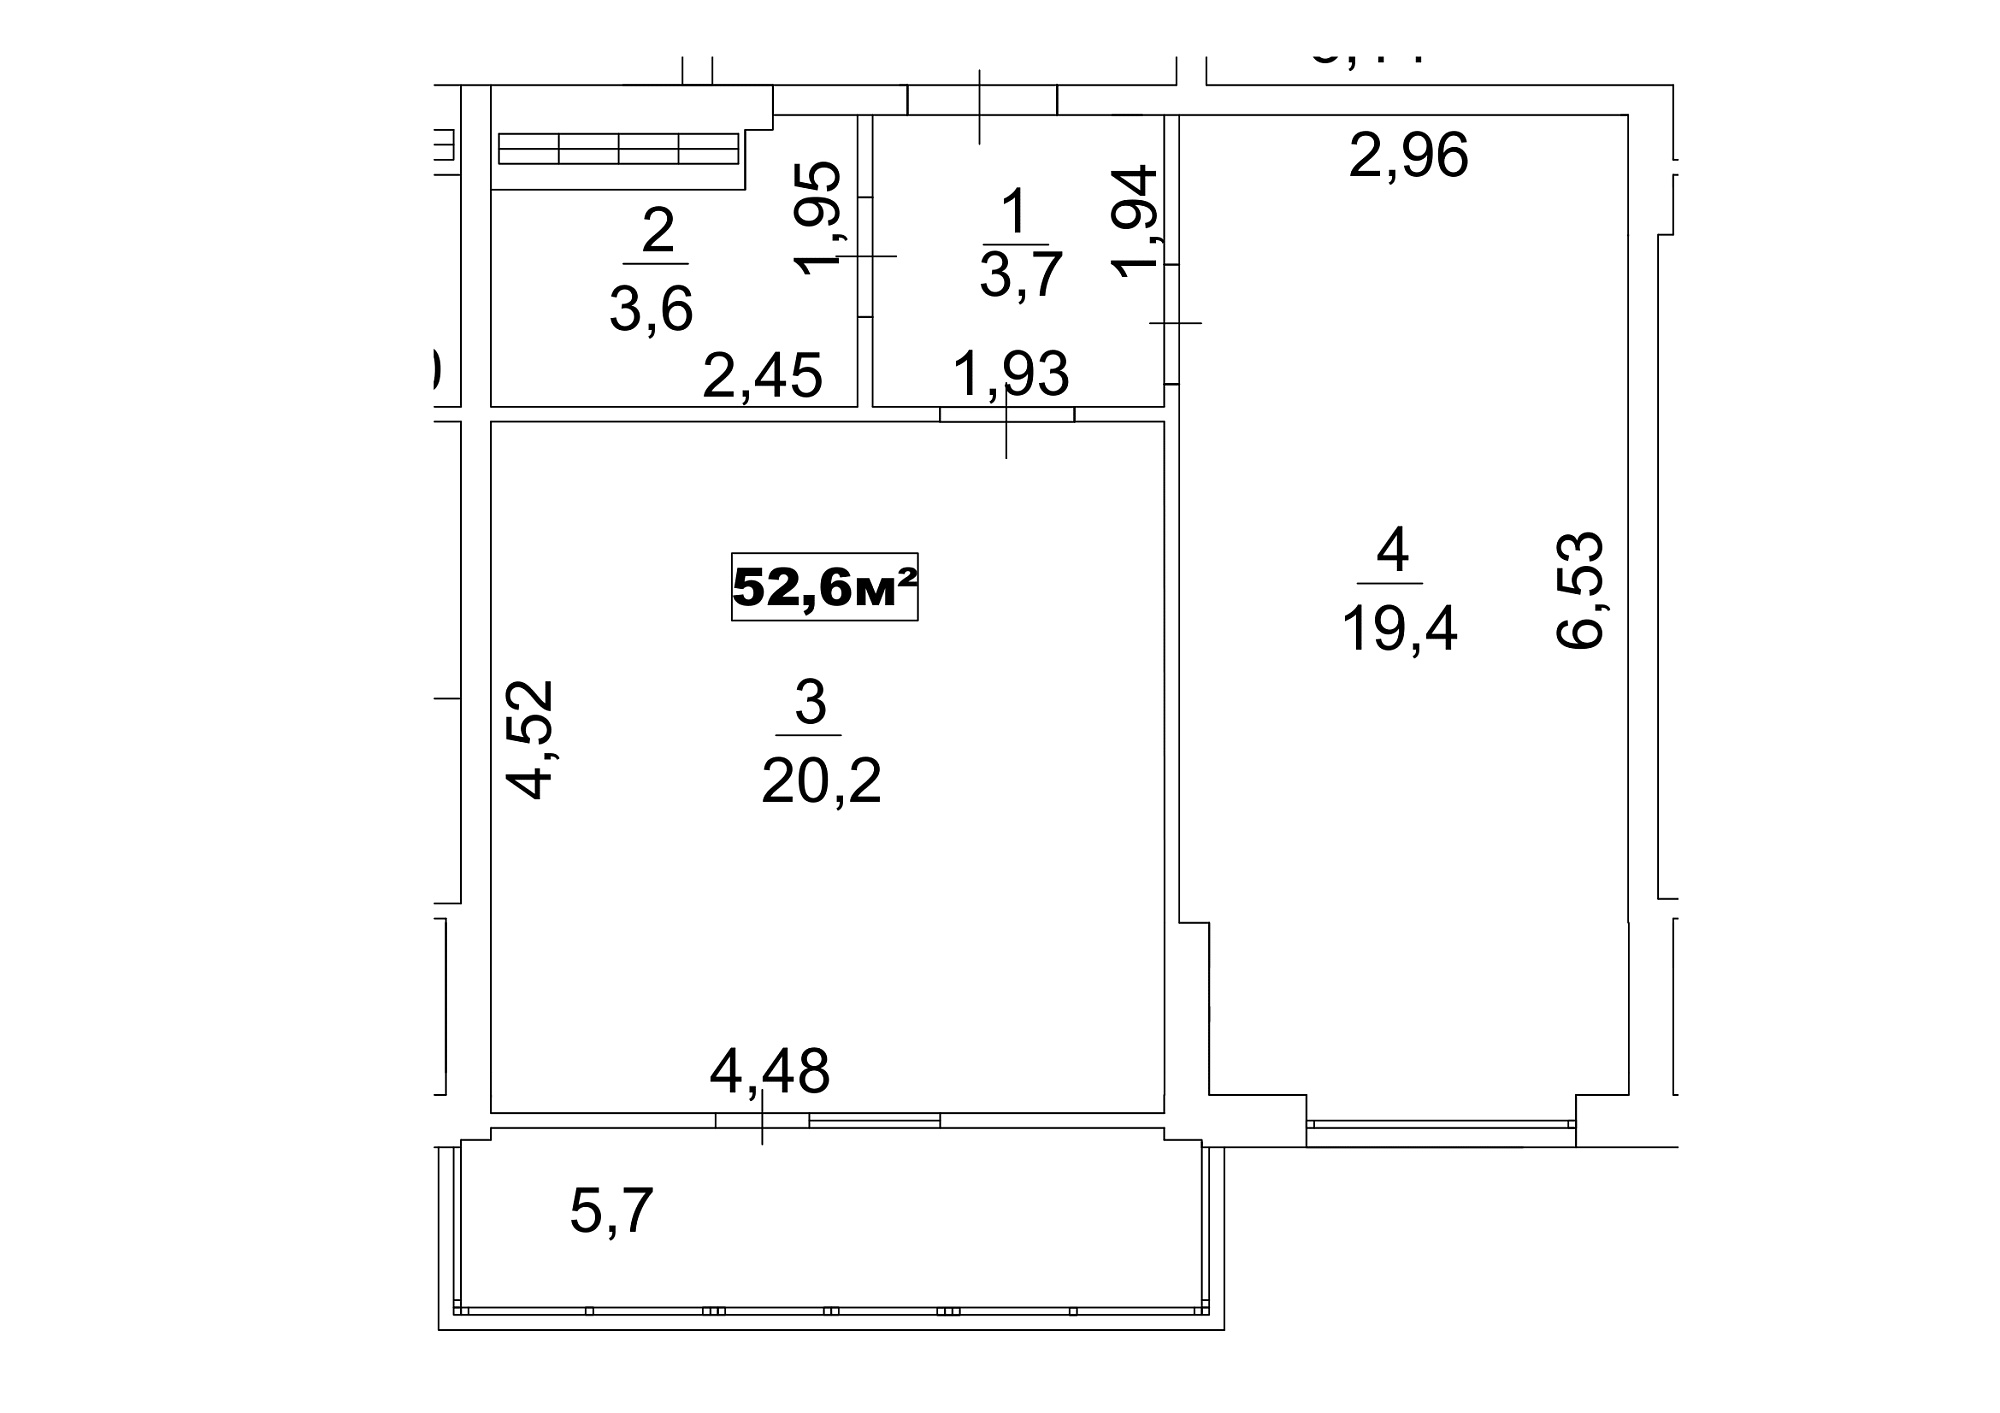 Planning 1-rm flats area 52.6m2, AB-13-03/00023.